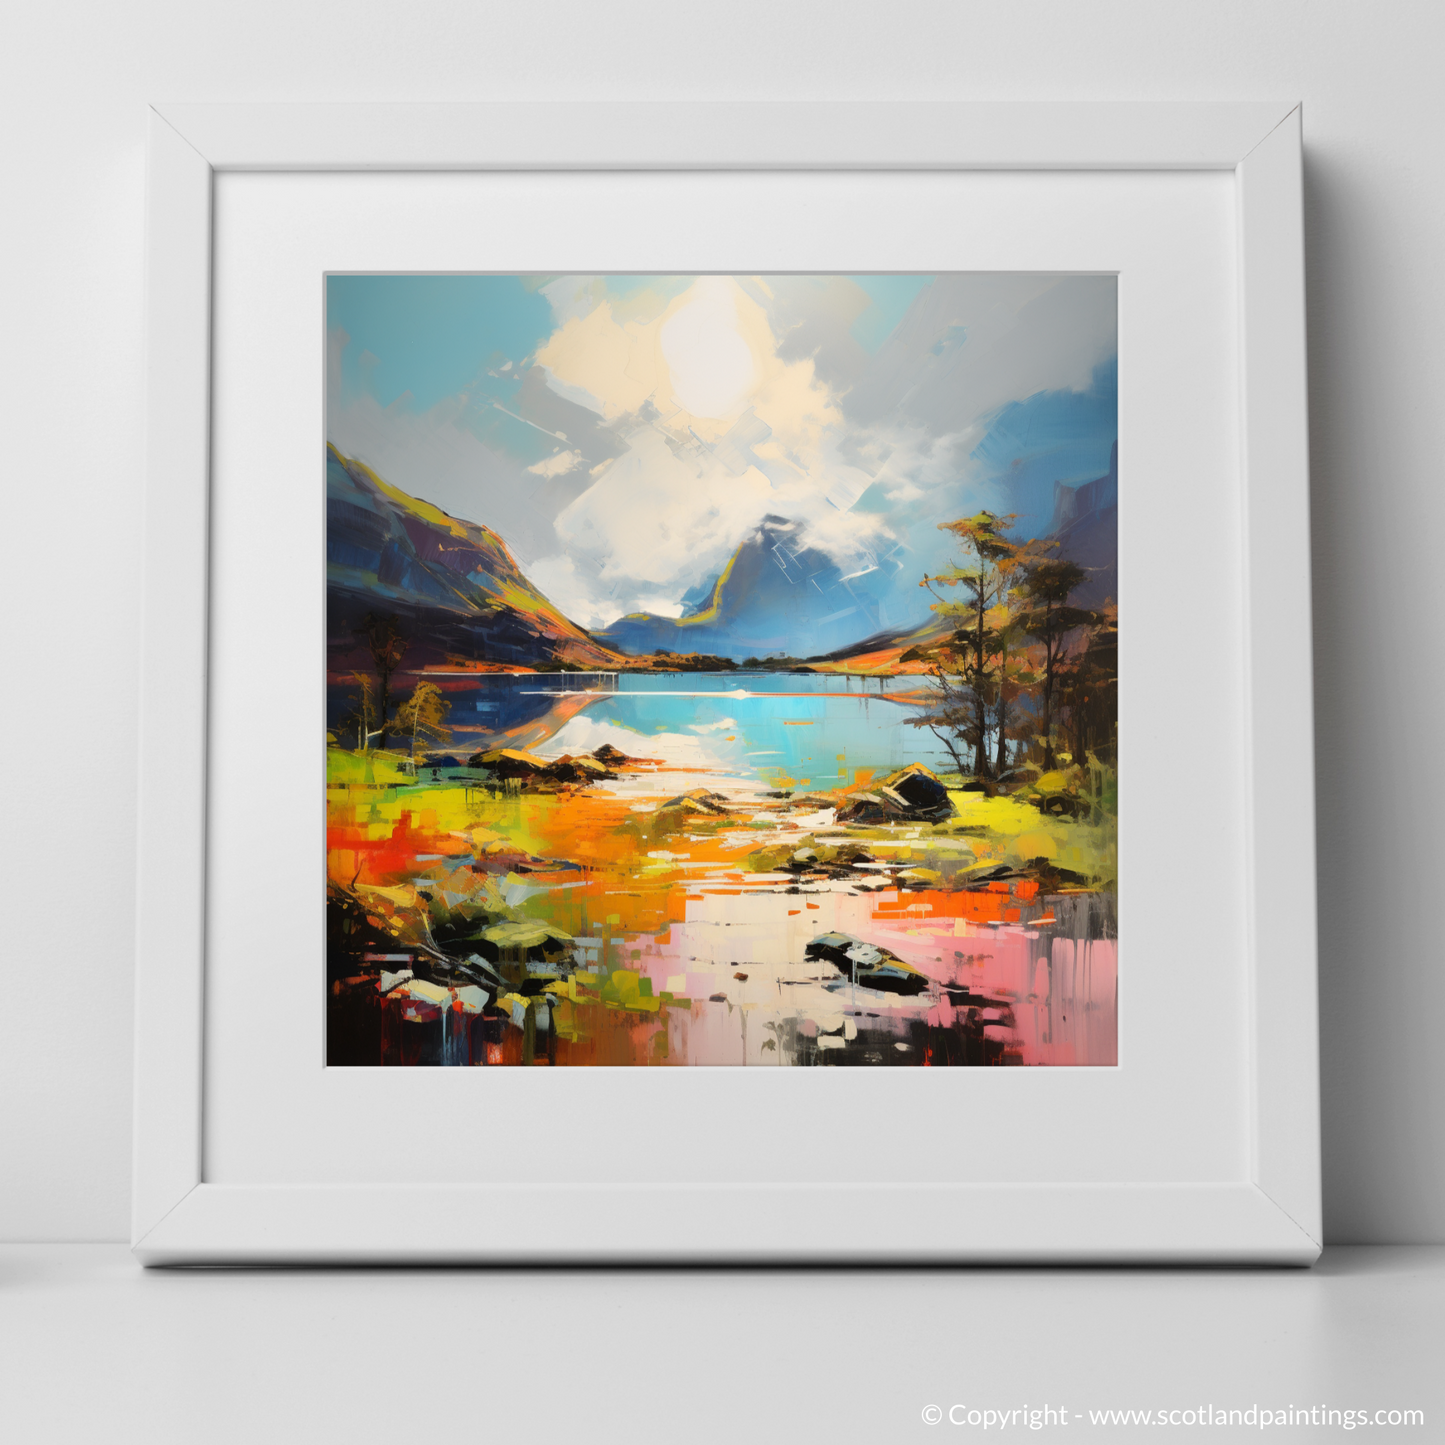 Art Print of Loch Maree, Wester Ross in summer with a white frame